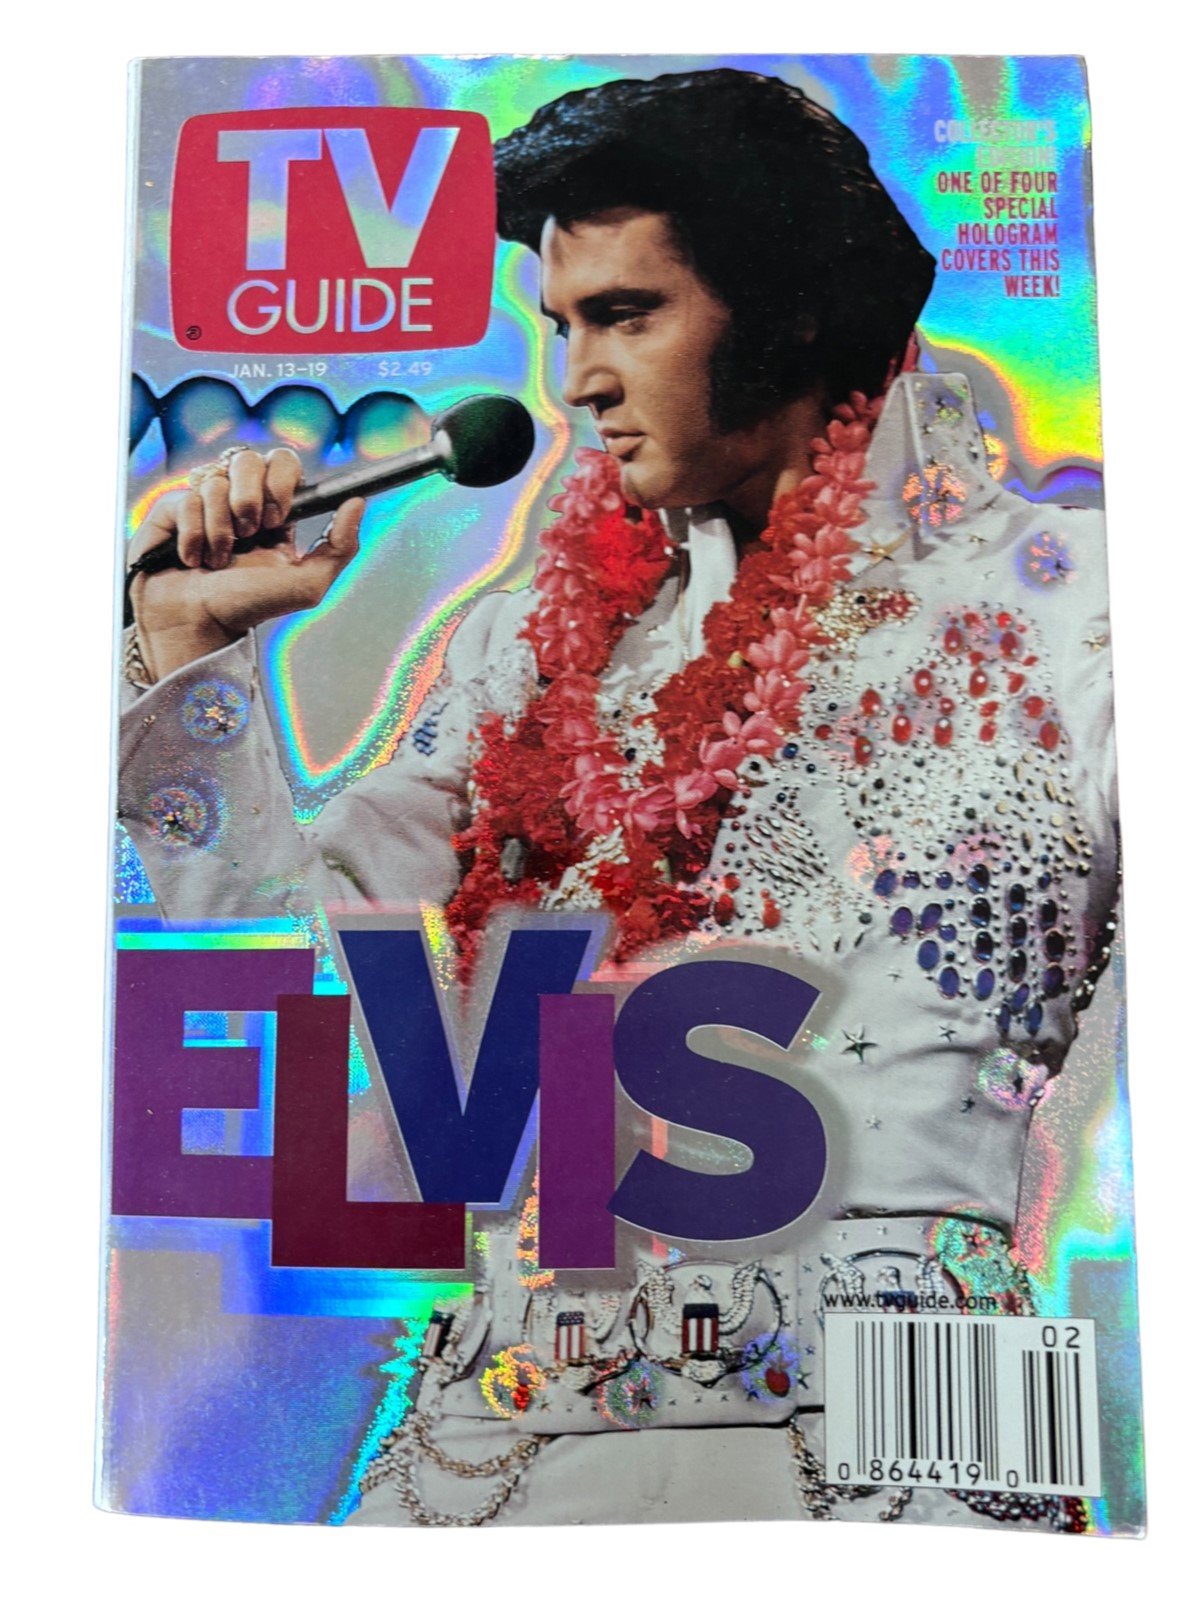 Elvis Presley Mini TV Guide Magazines 1997-2001 Issues Lot of 5